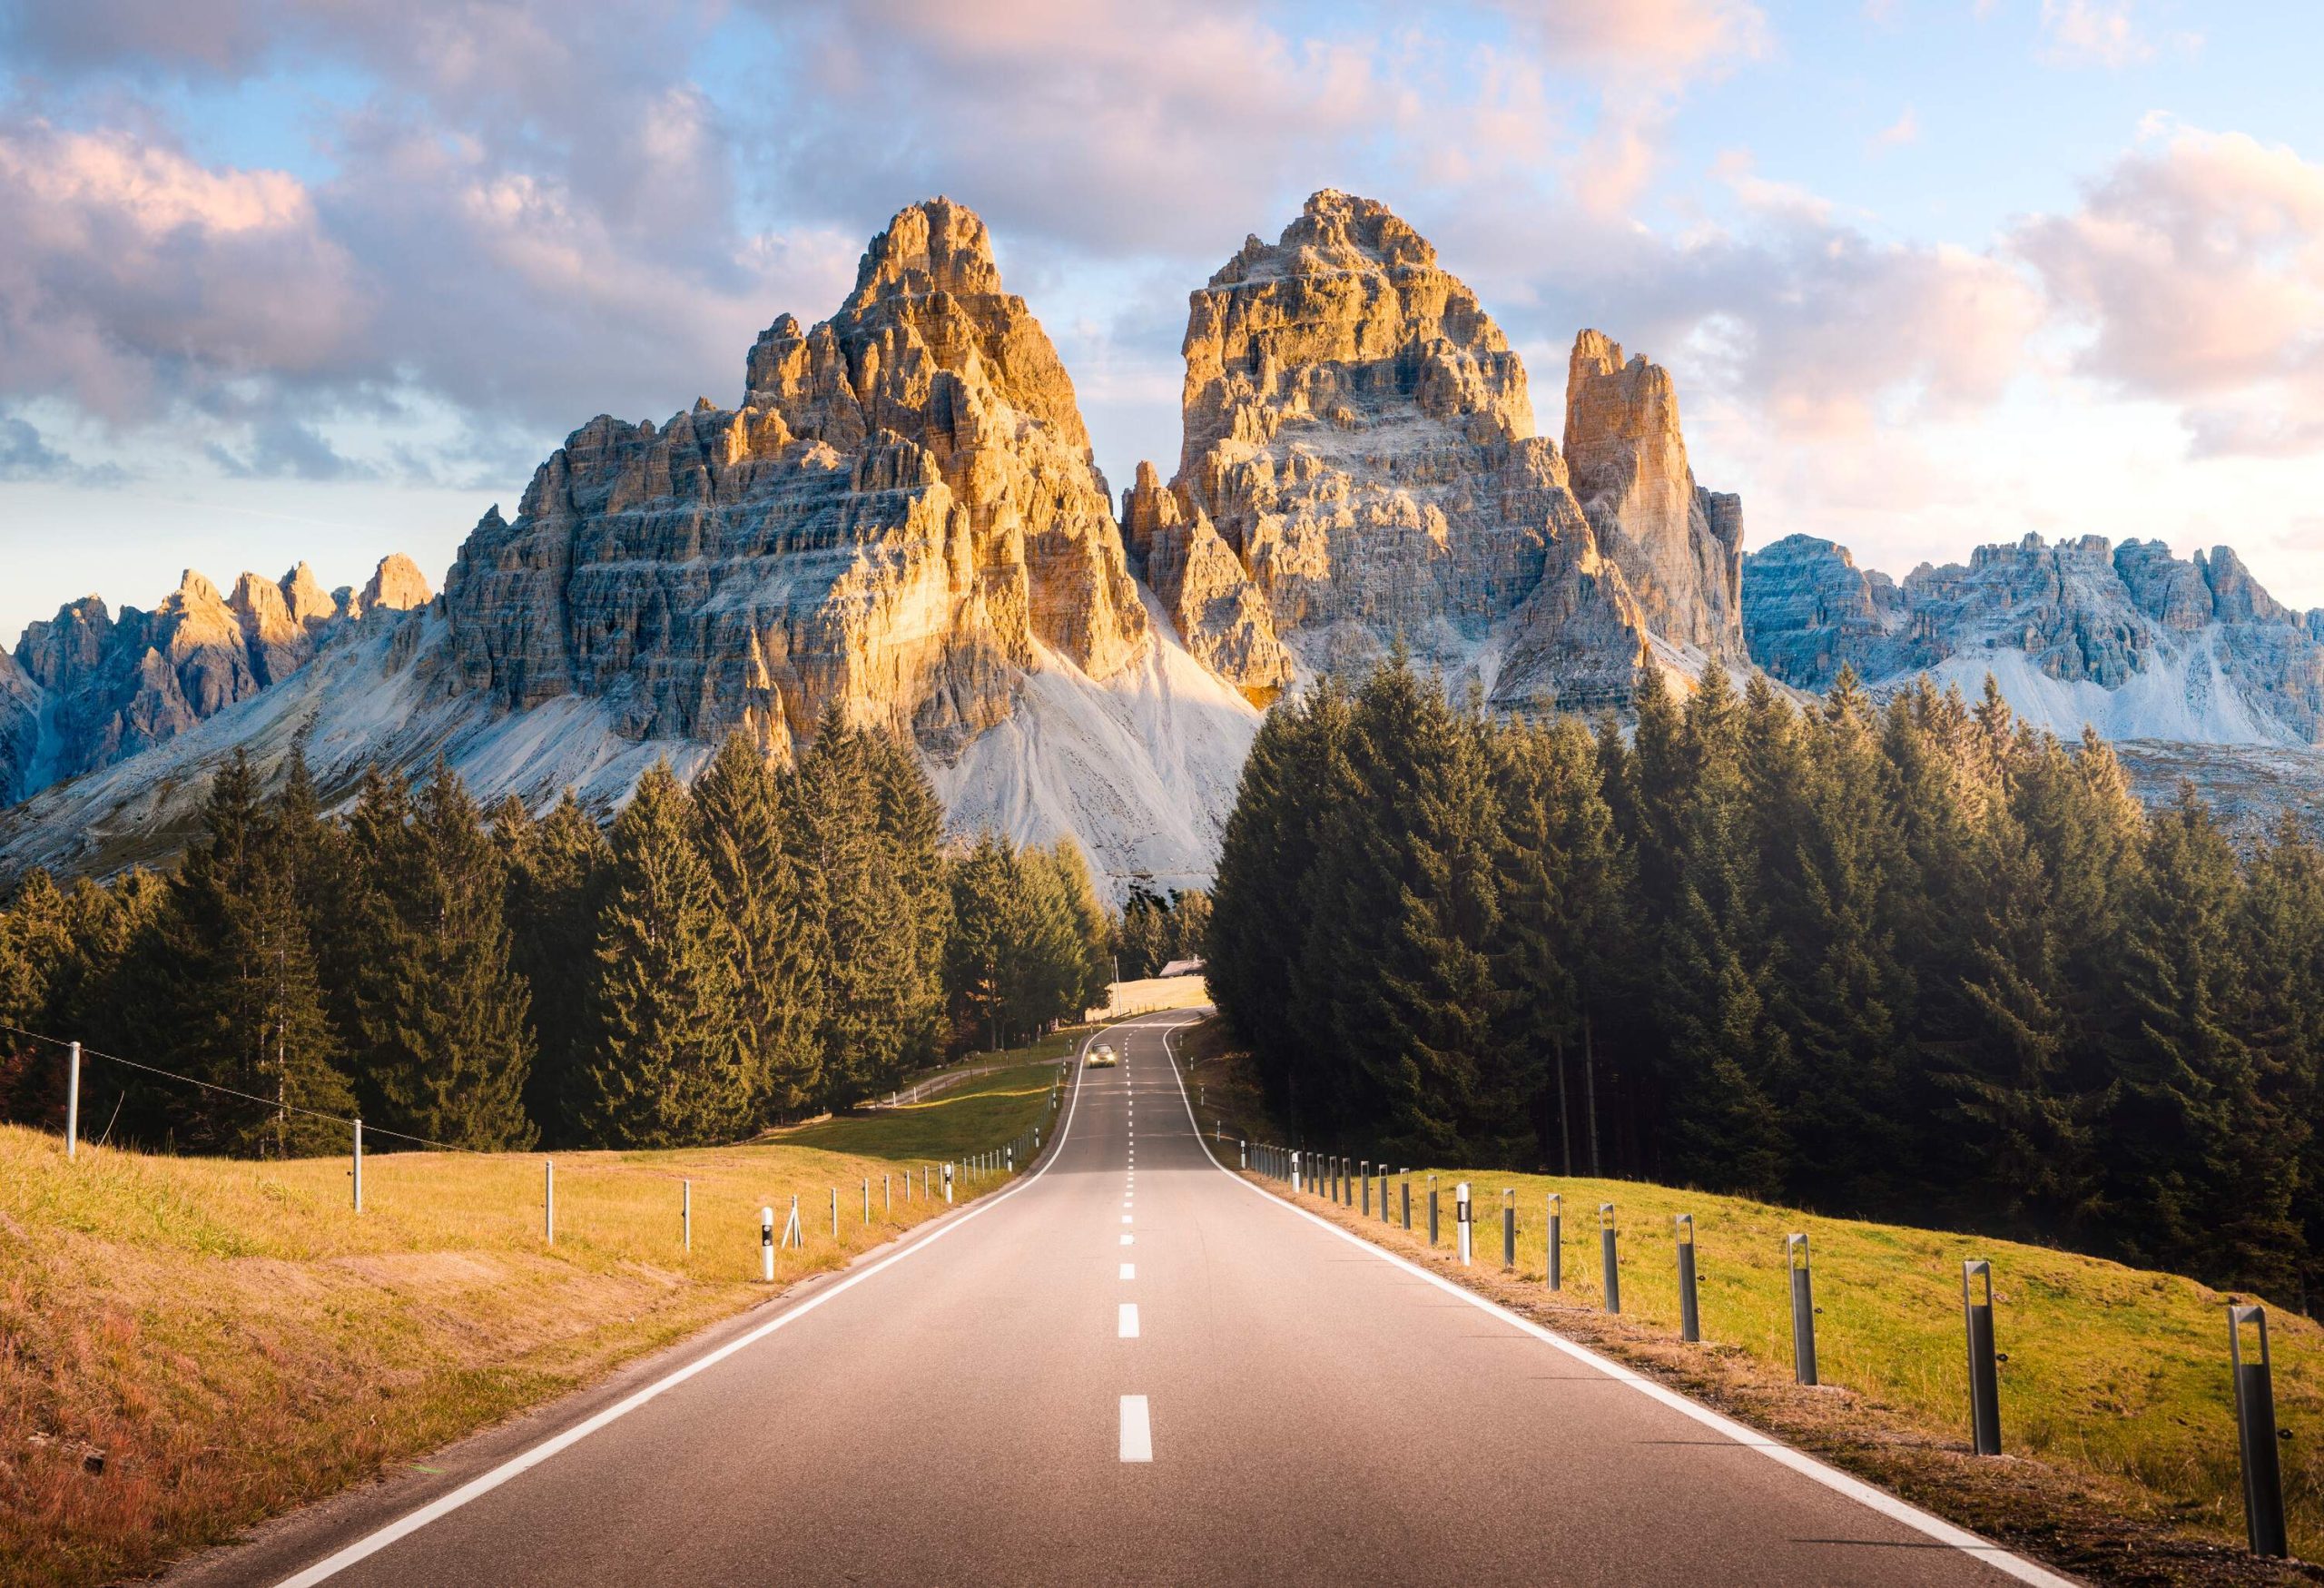 A car driving down a road that runs through coniferous trees and along the foothills of the Tre Cime di Lavaredo mountains.